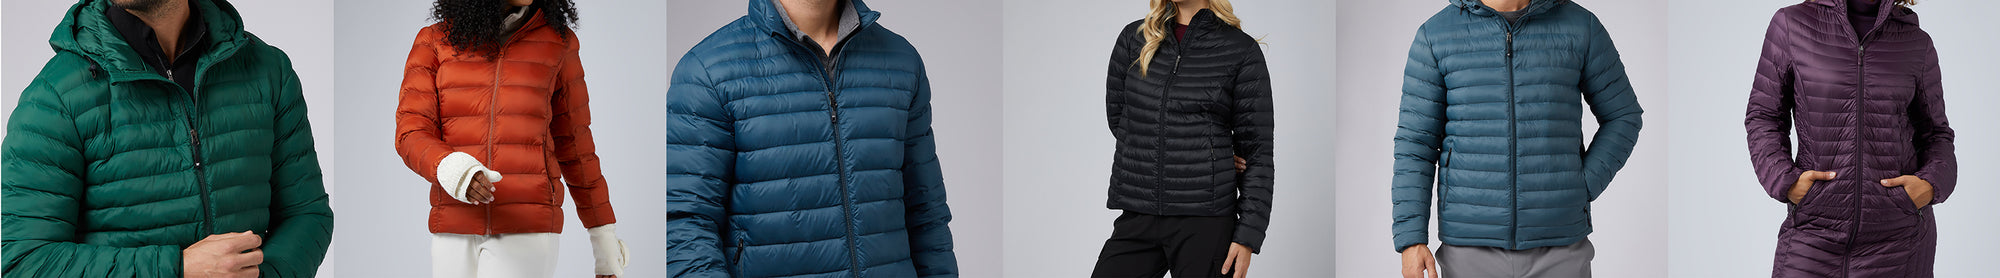 PACKABLE JACKETS